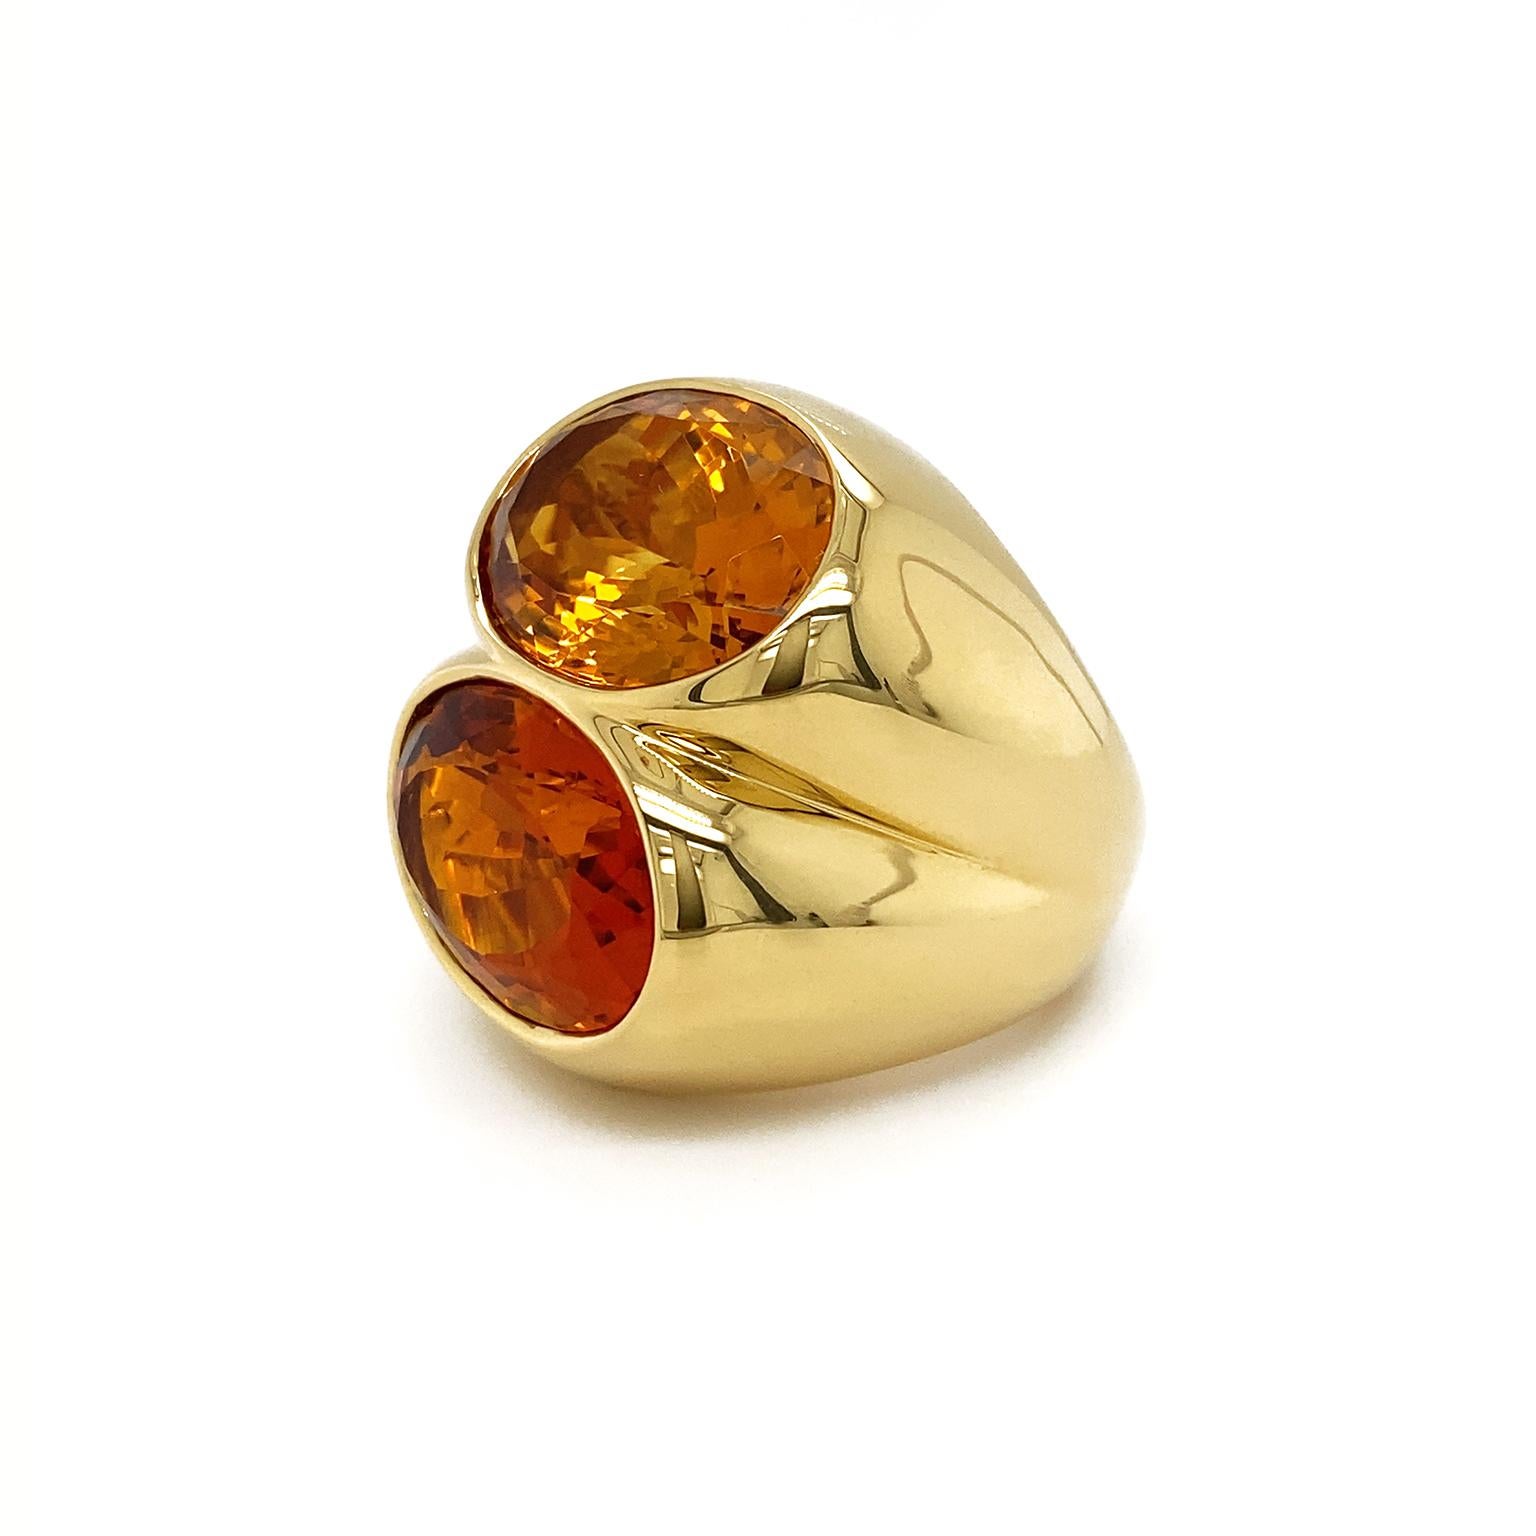 Valentin Magro Double Oval Citrine Ring transforms gems into a study in gold. One of the gems is a deep red-orange Madeira citrine, named after the wine’s hue. The other is on the yellower end of orange. Both are fashioned into ovals and bezel set